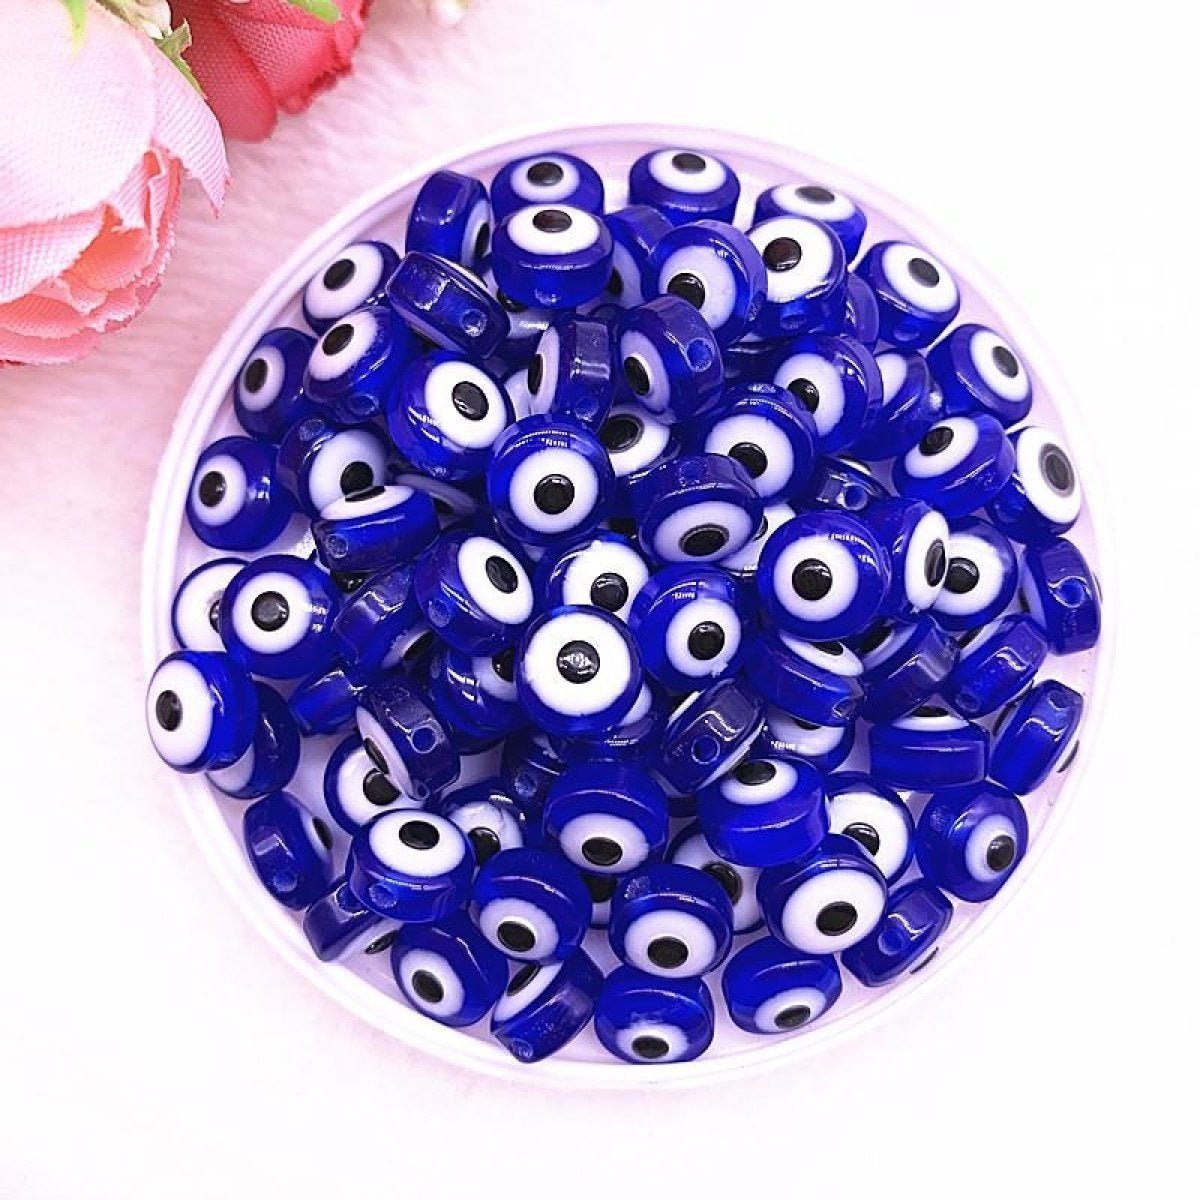 48pcs 8/10mm Resin Spacer Beads Double Sided Eyes for Jewellery Making DIY Bracelet Beads Flat Backed - Deep Blue 8mm - - Asia Sell